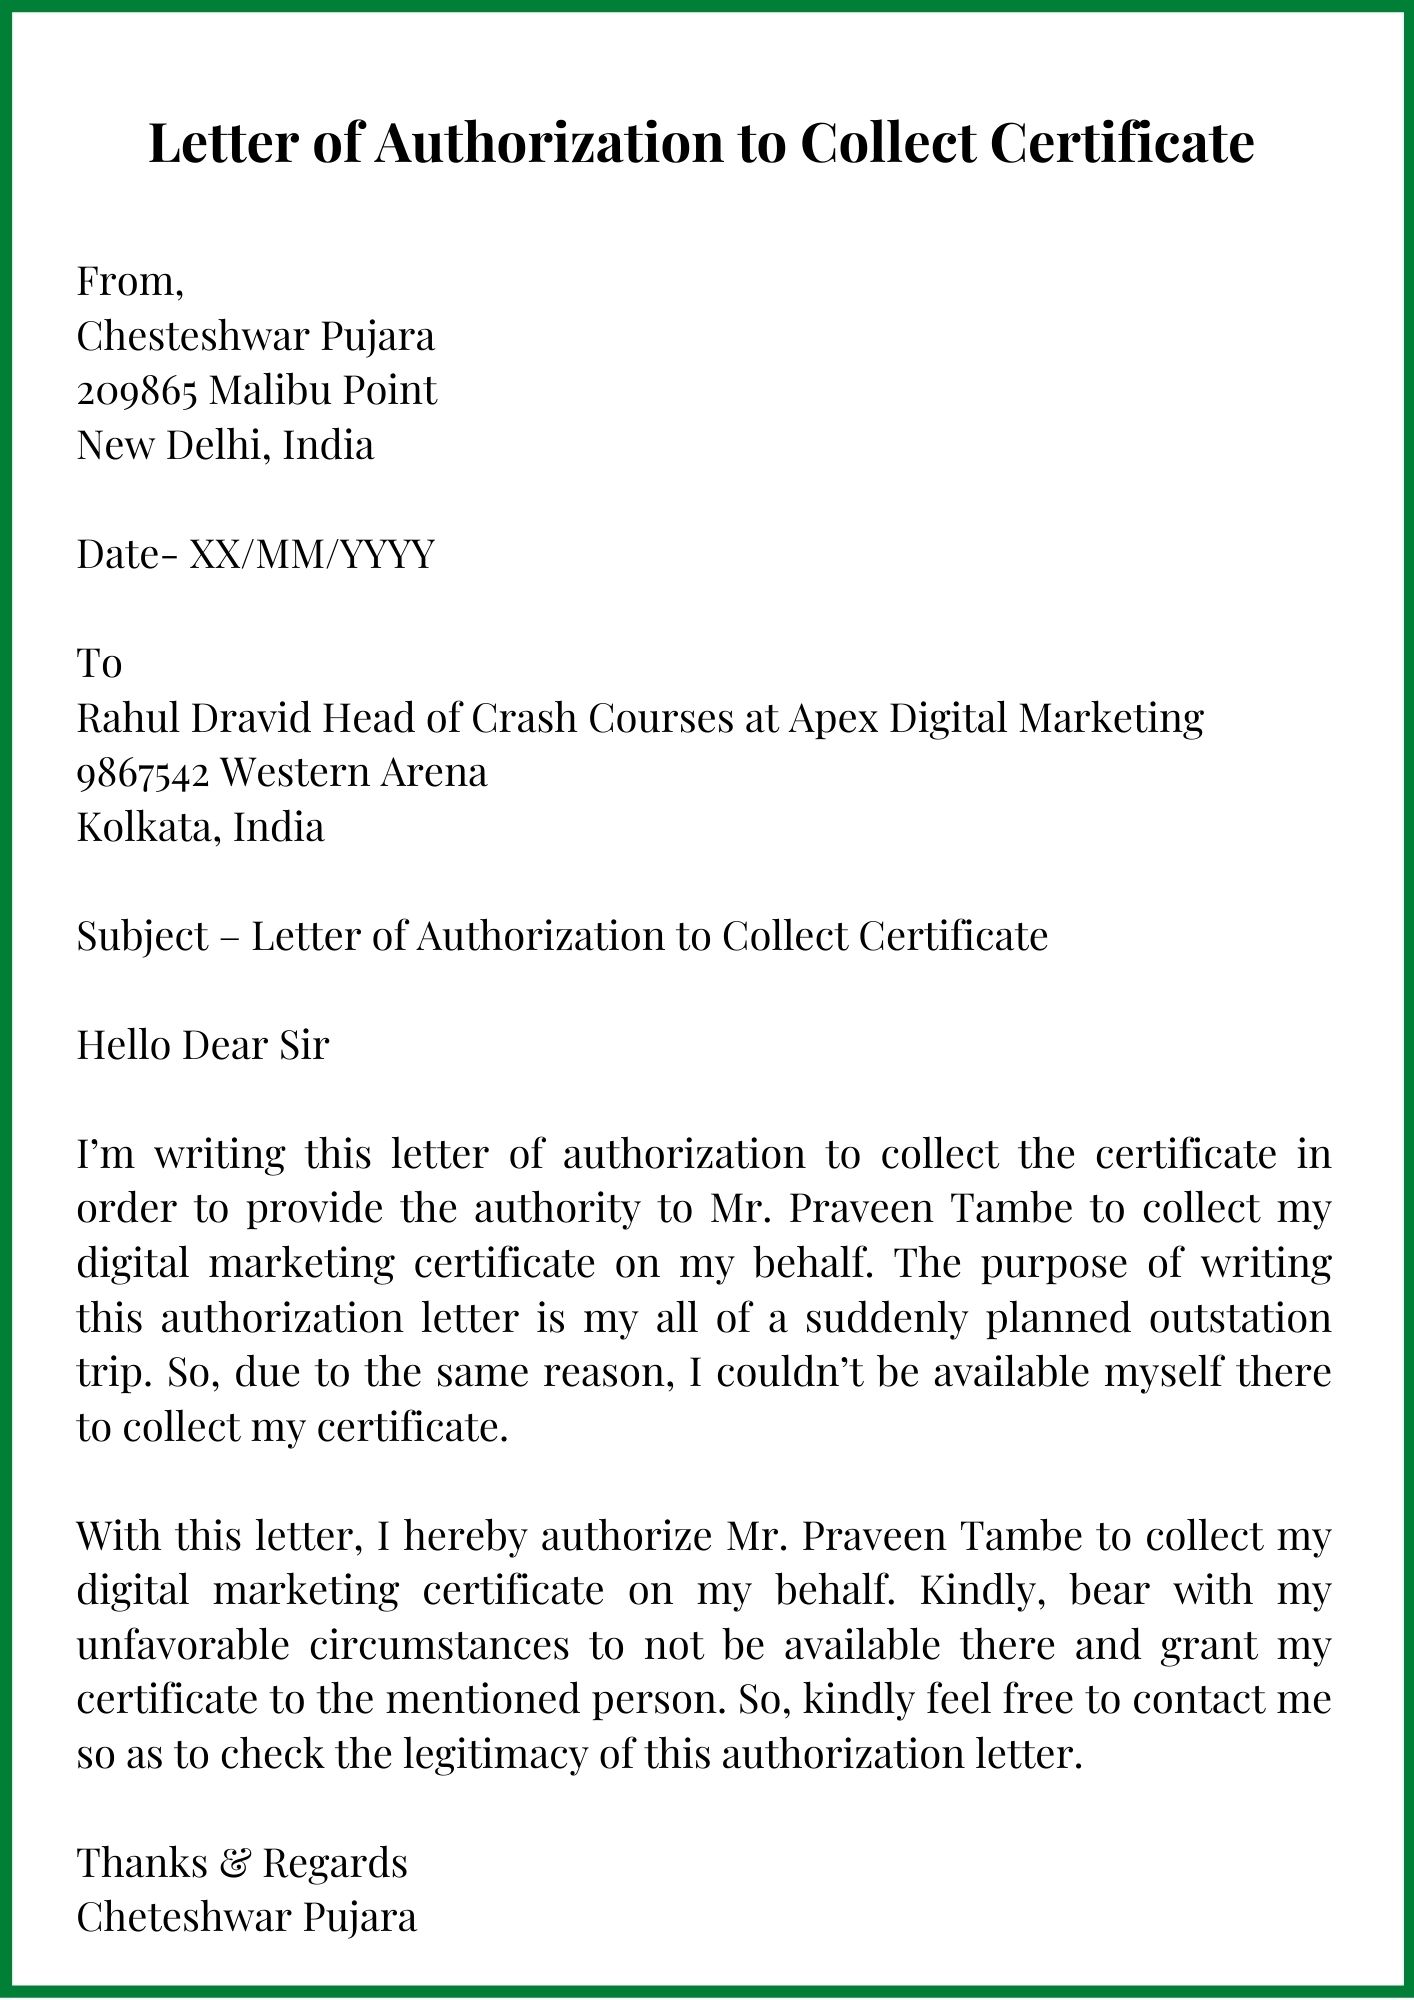 Sample Letter Of Authorization To Collect Certificate Authorization 9507